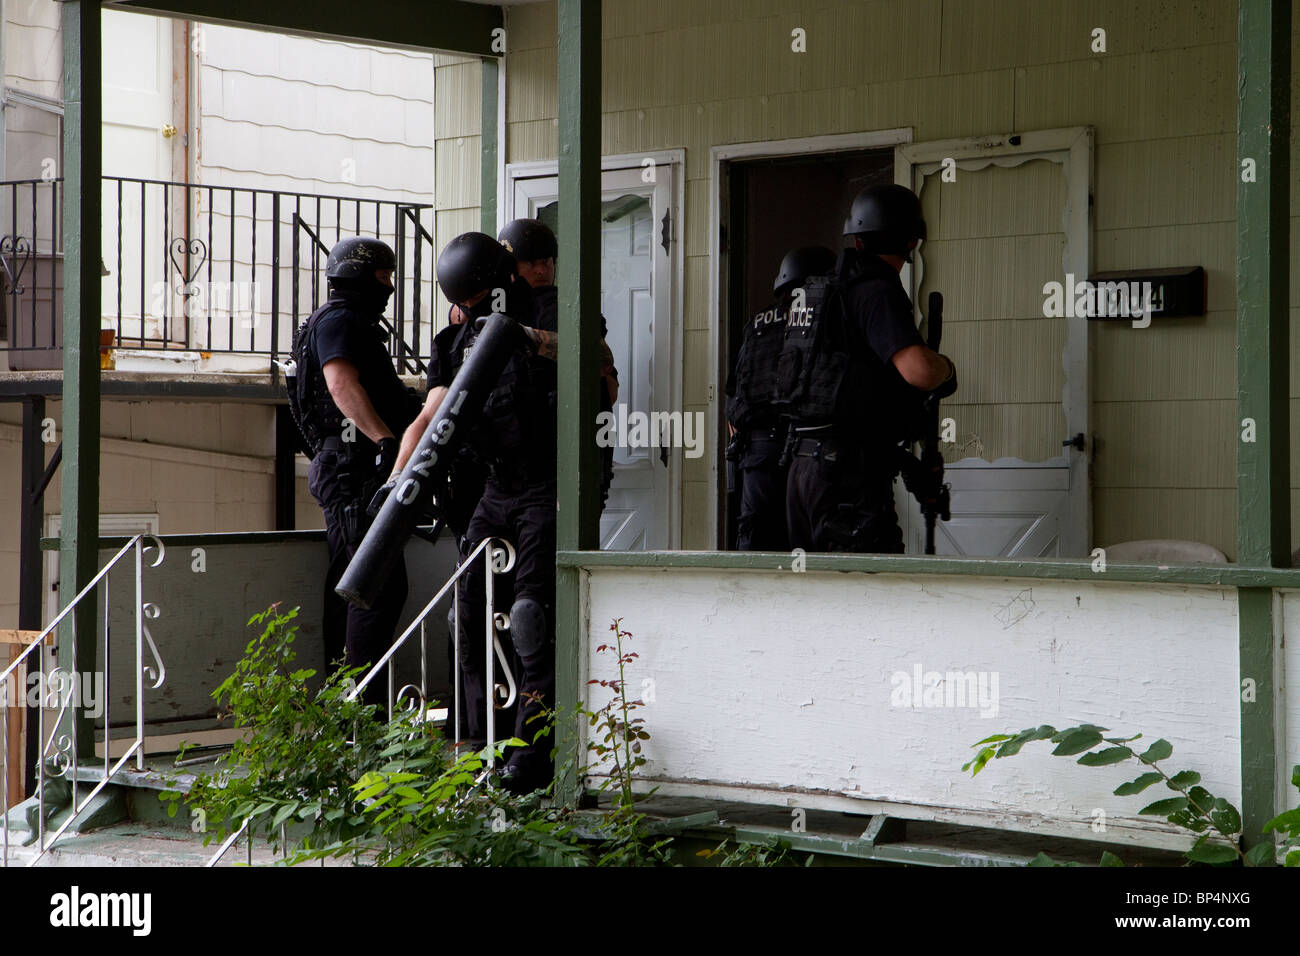 Police Tactical team from Street Narcotics Unit approach residence to serve a drug related high risk search warrant. KC/MO PD. Stock Photo